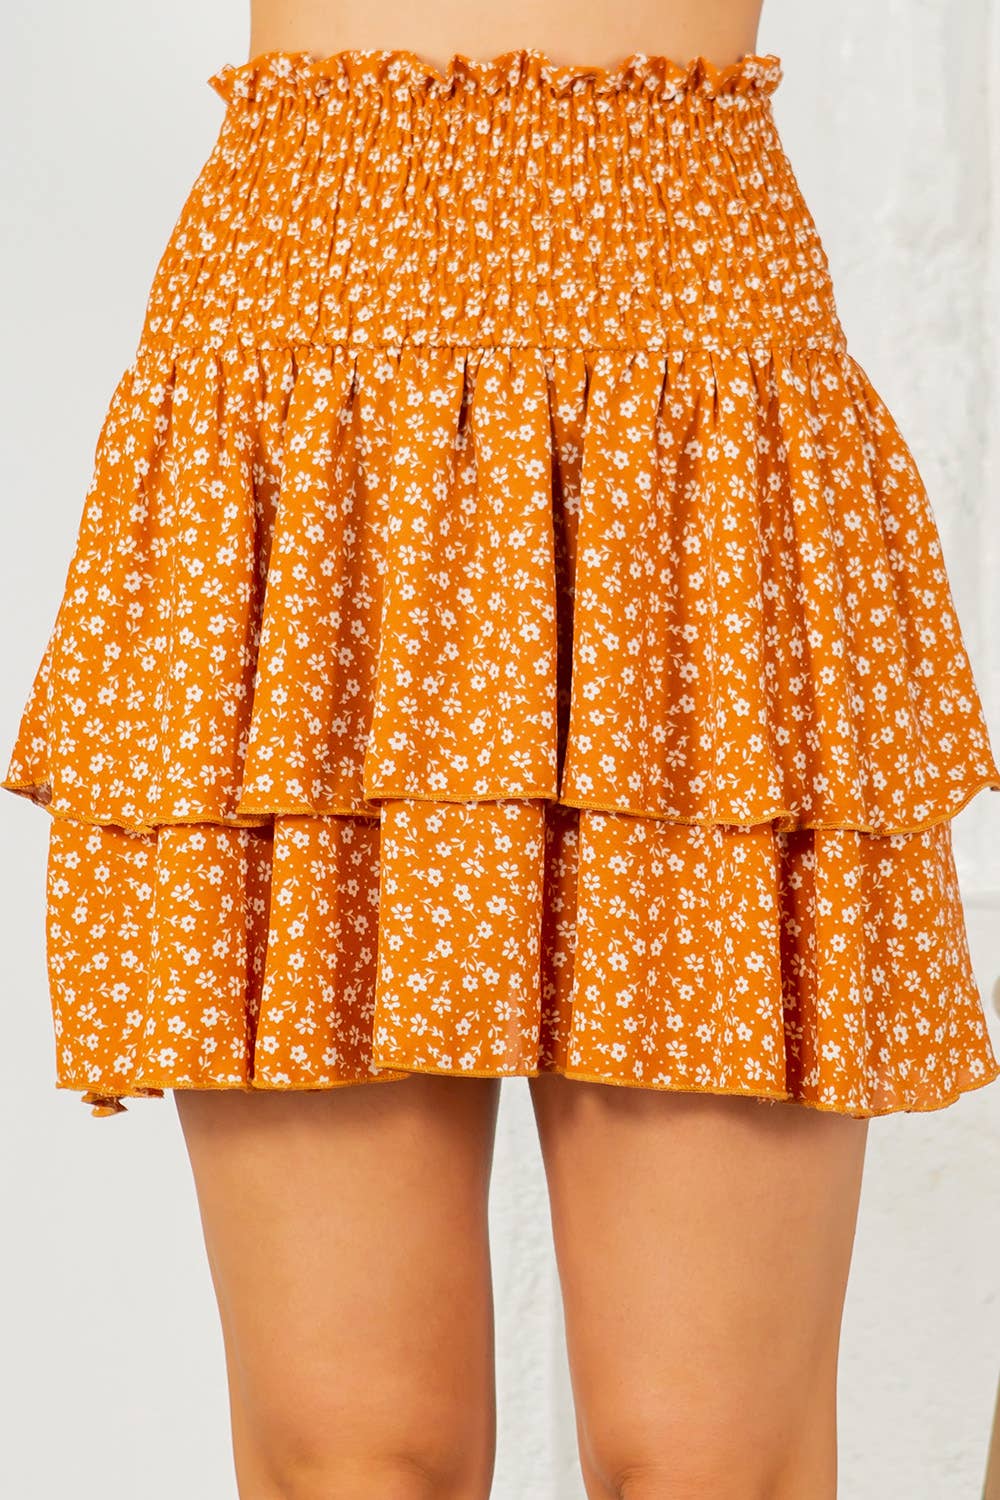 Smocked Tiered Layered Skirt-2 Colors-W - Storm and Sky Shoppe - Orange Farm Clothing